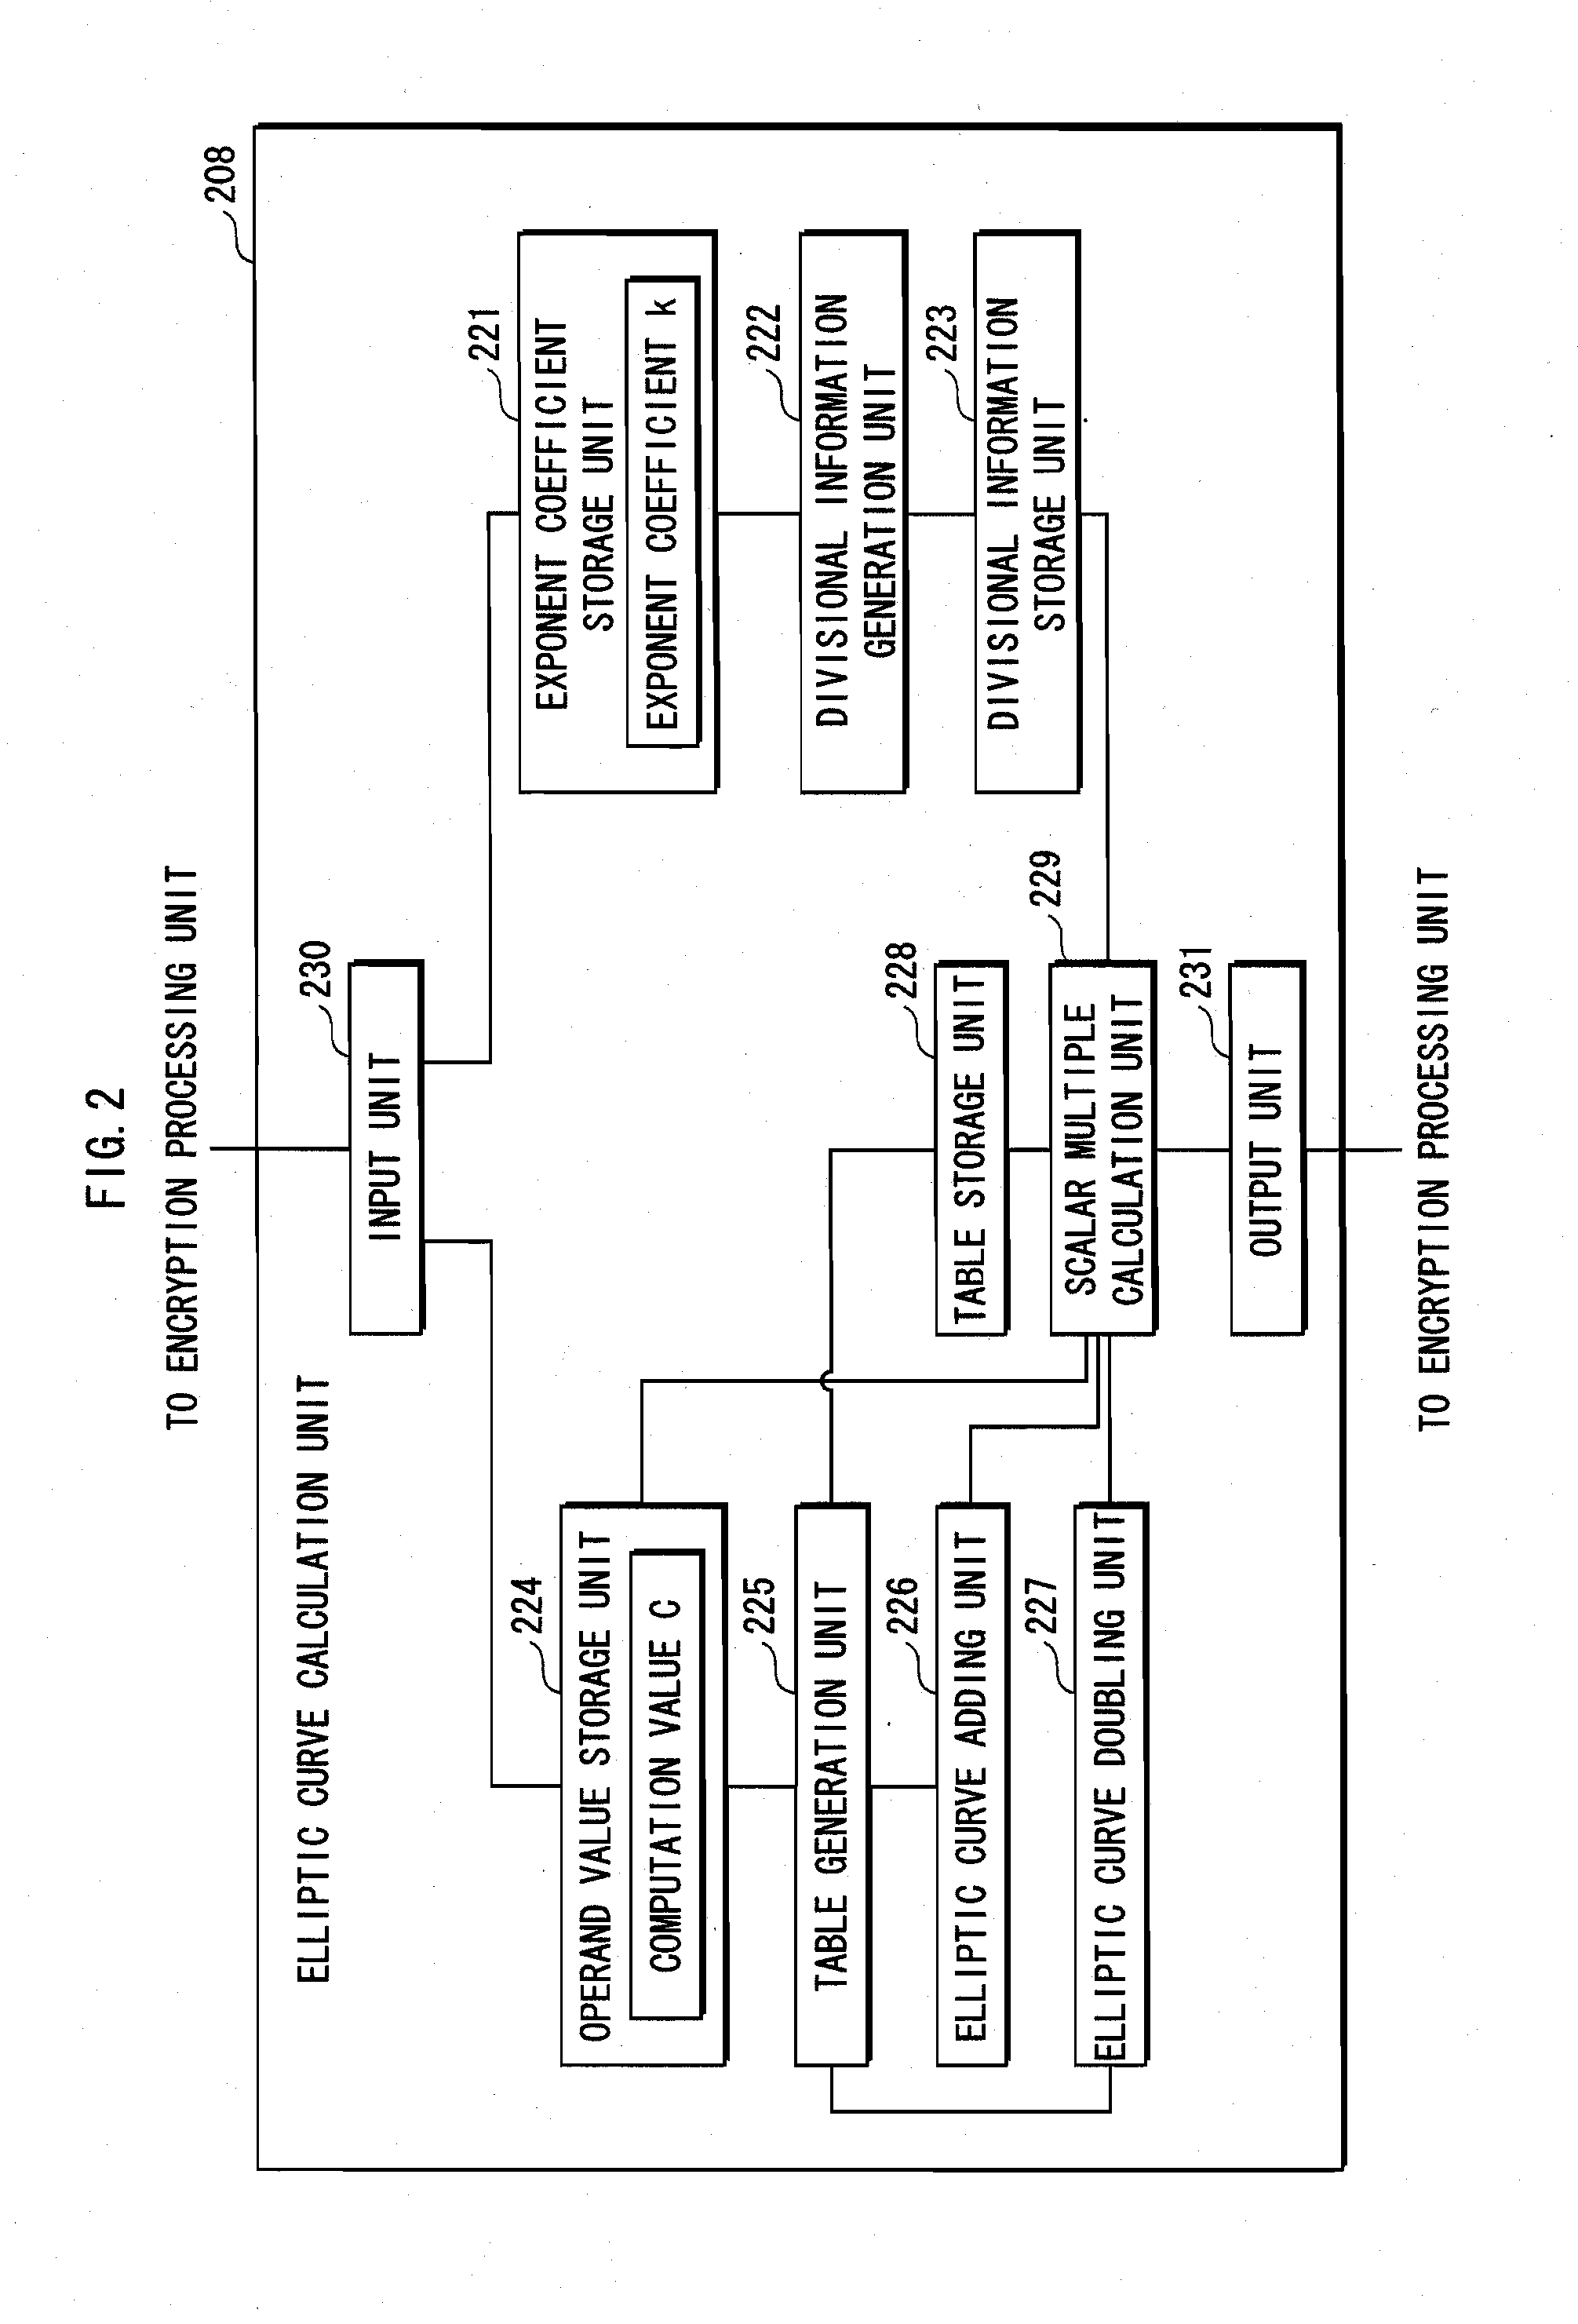 Information security device and elliptic curve operating device